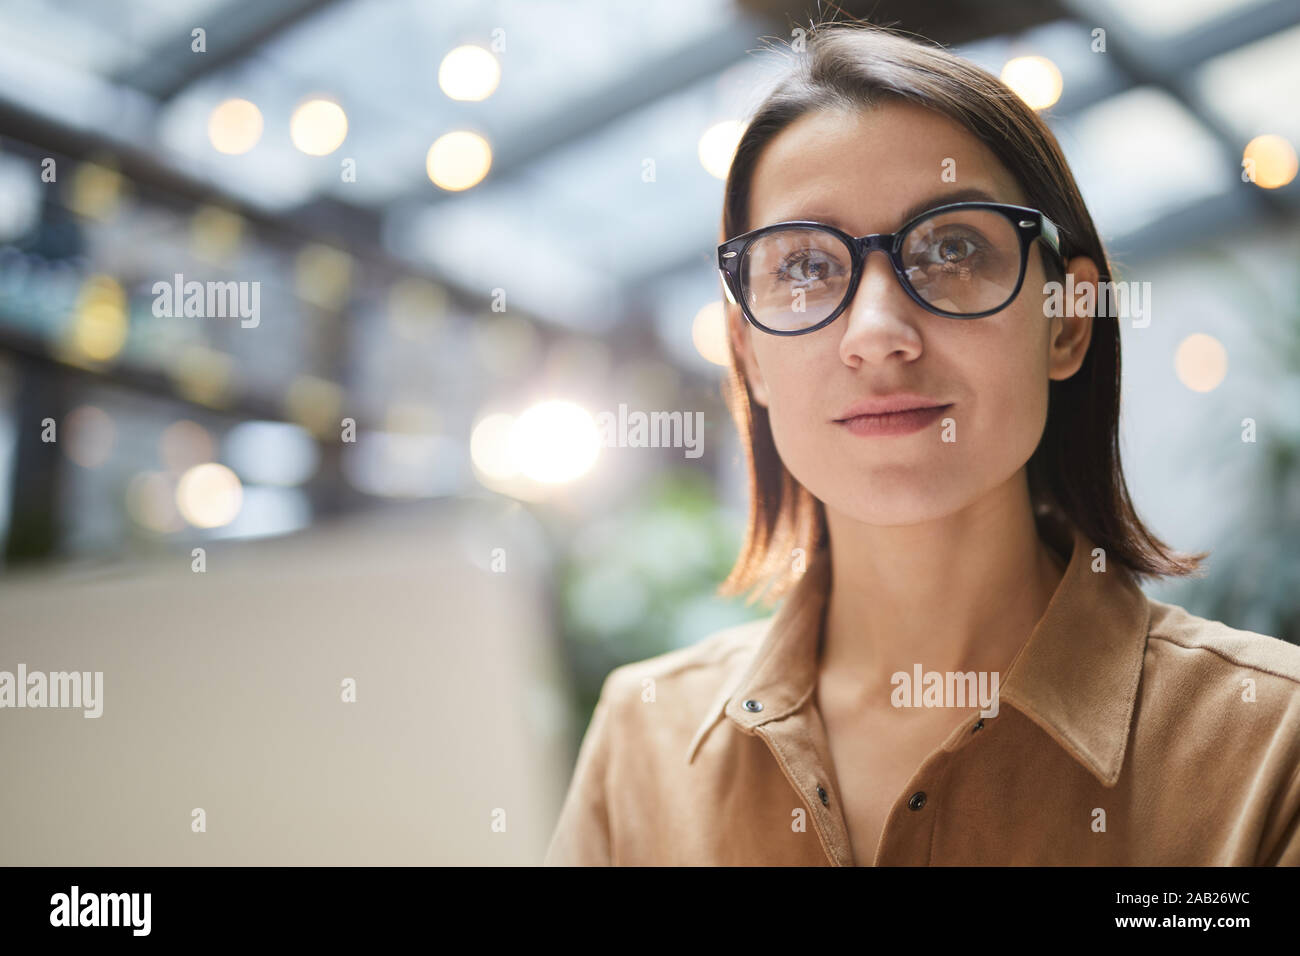 Portrait of contemporary businesswoman wearing glasses smiling at camera while working in outdoor cafe, copy space Stock Photo